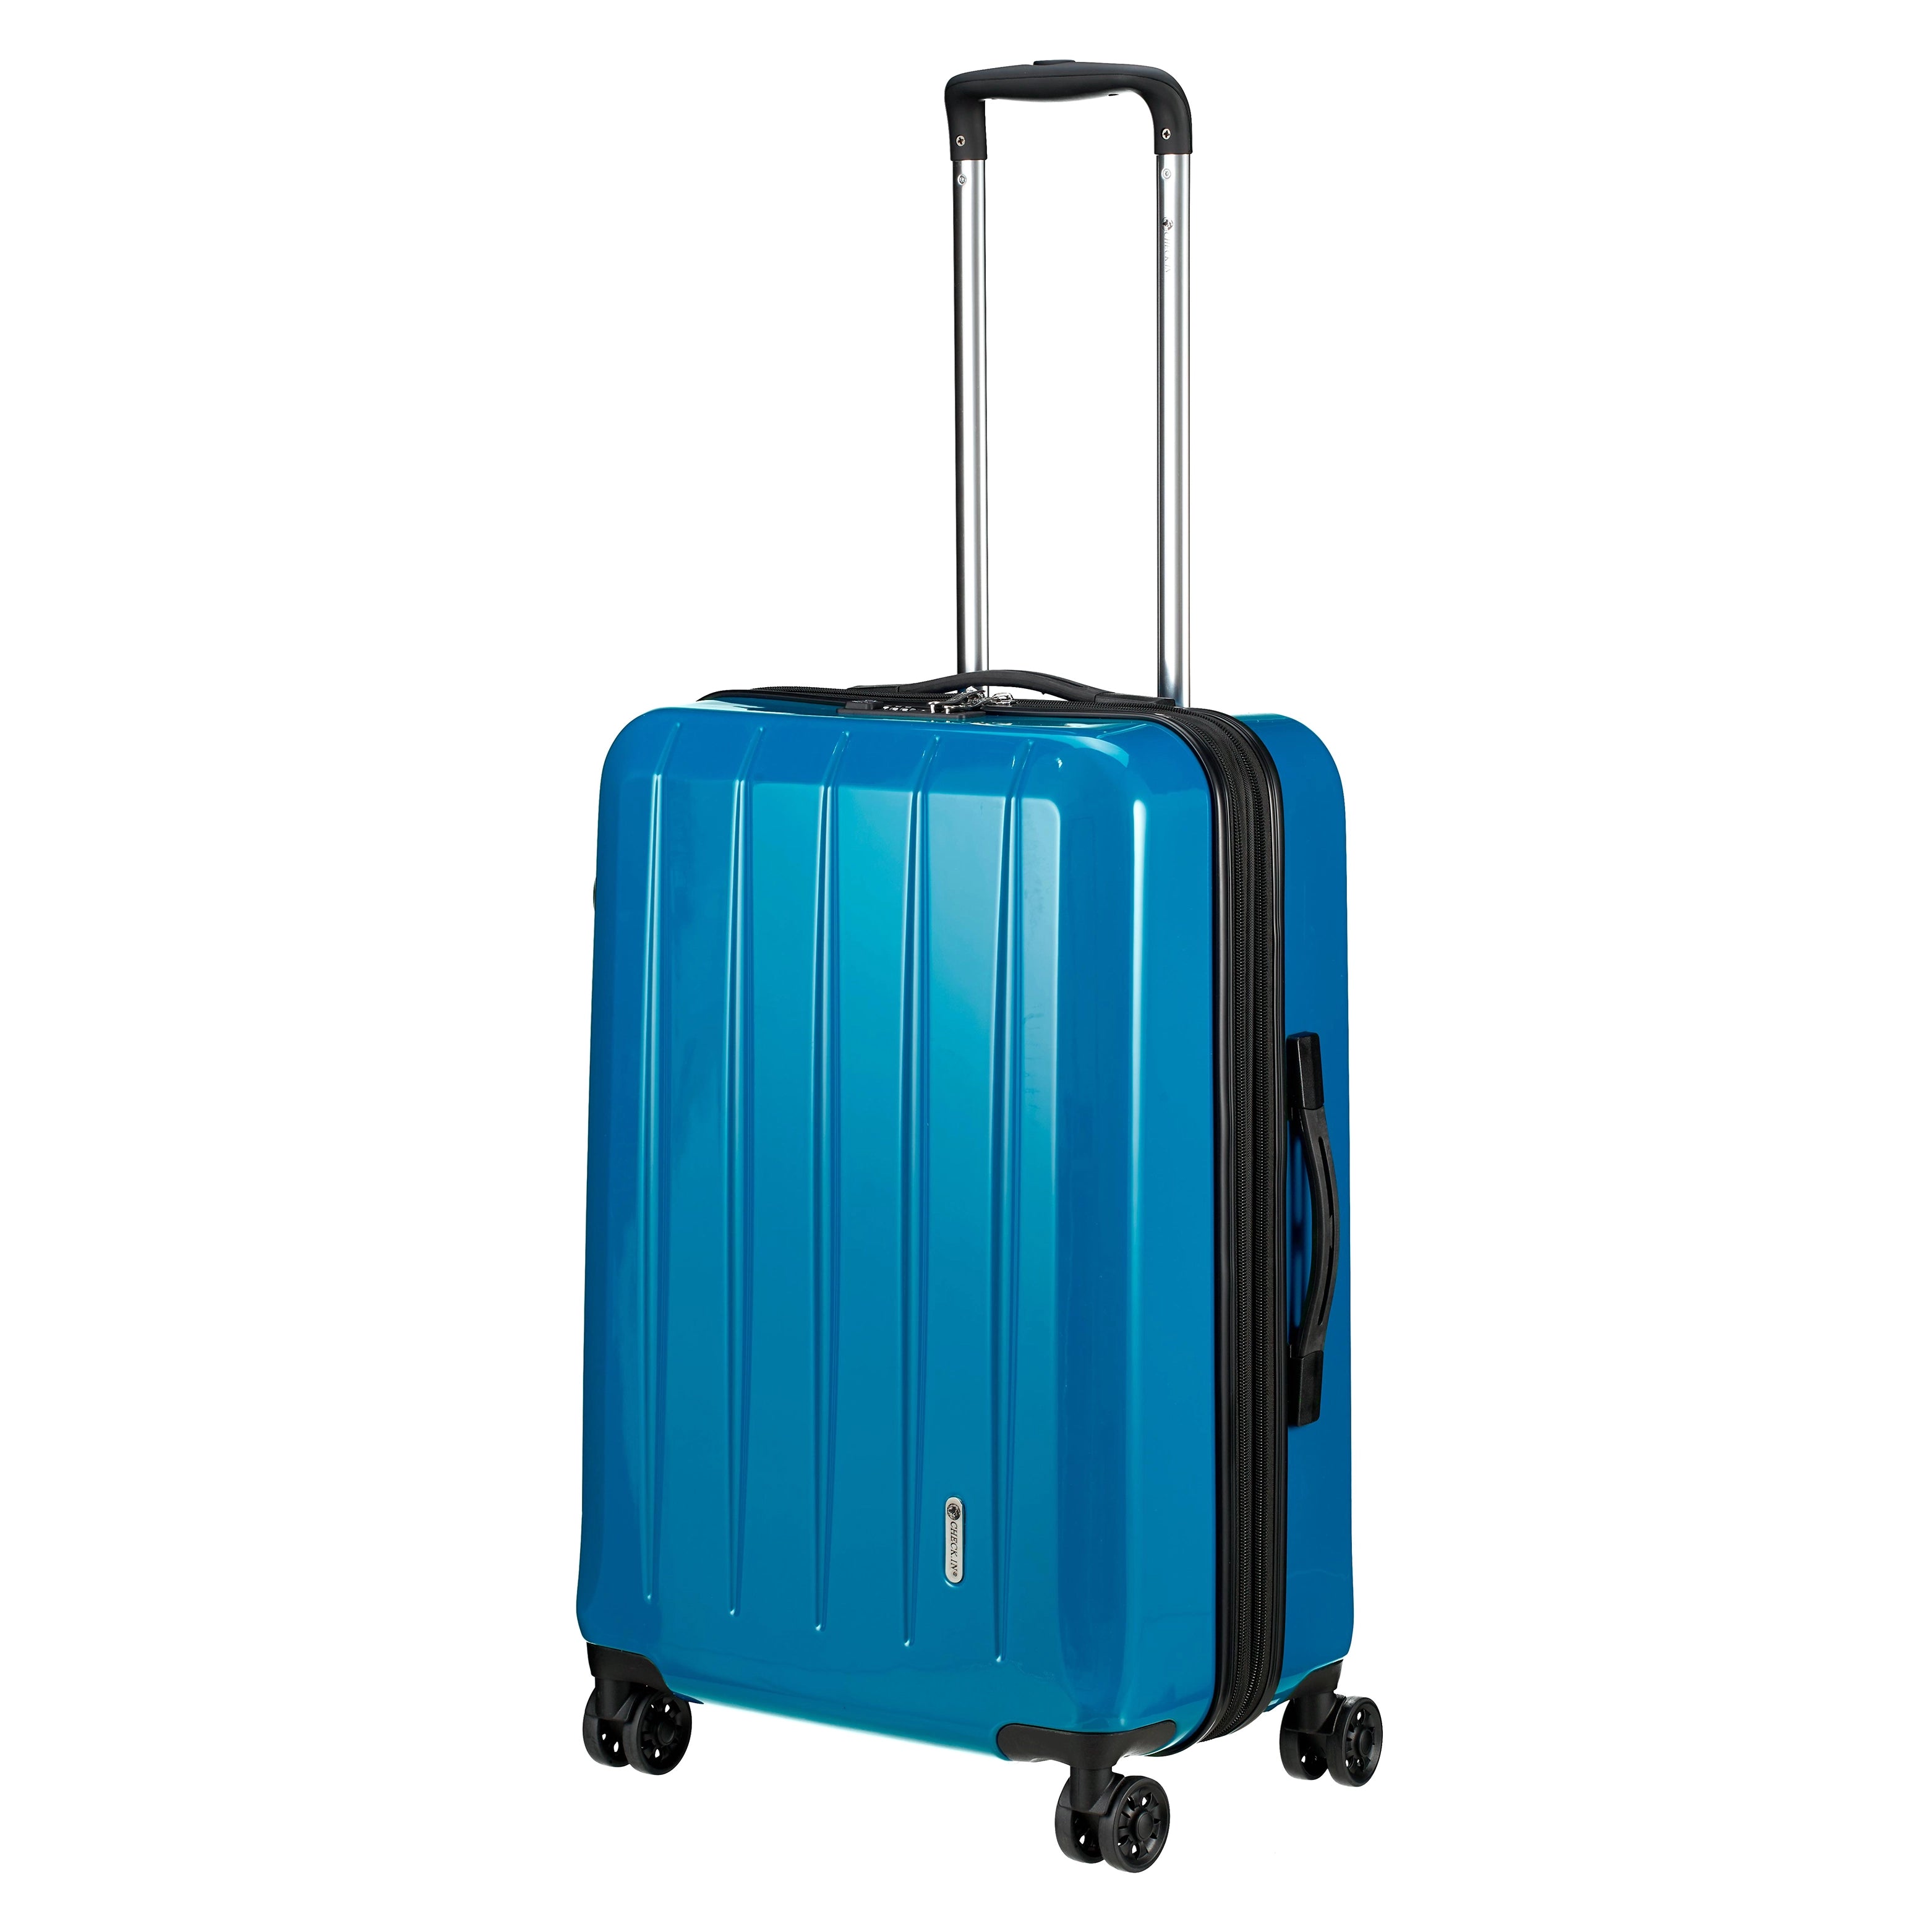 Check In London 2.0 4-wheel trolley 67 cm - turquoise